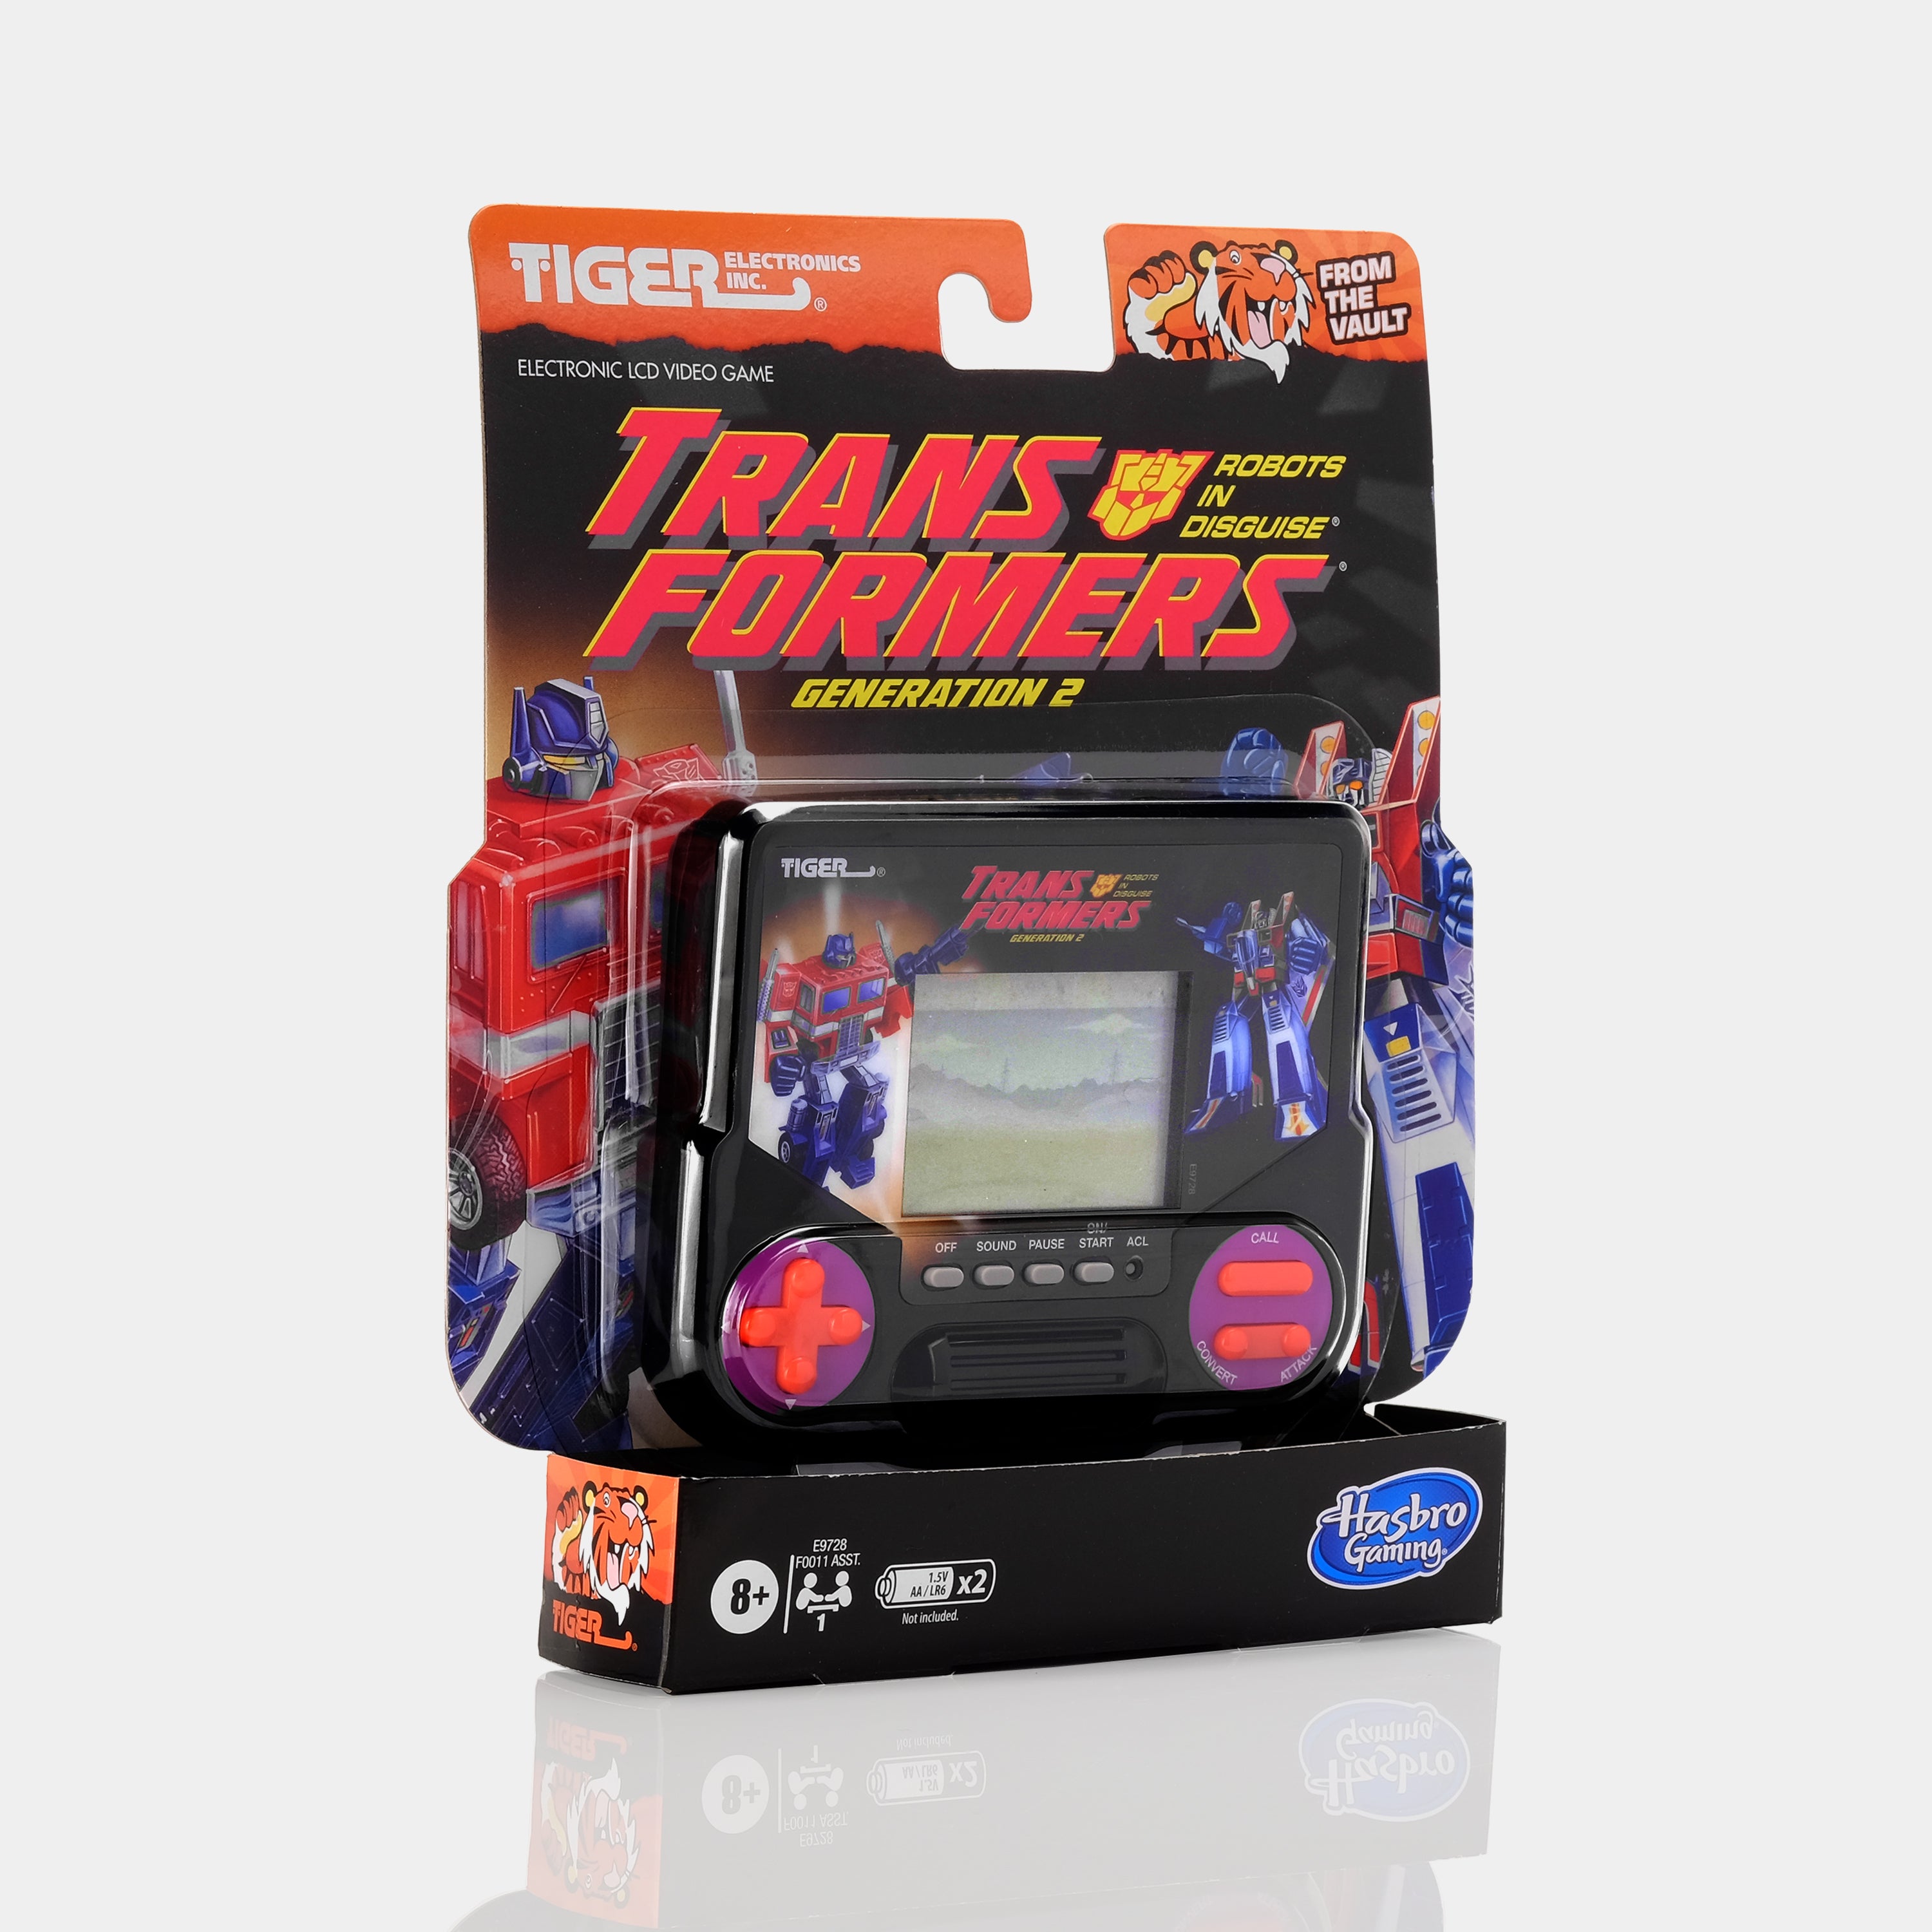 Transformers: Robots In Disguise (Generation 2) Handheld Video Game